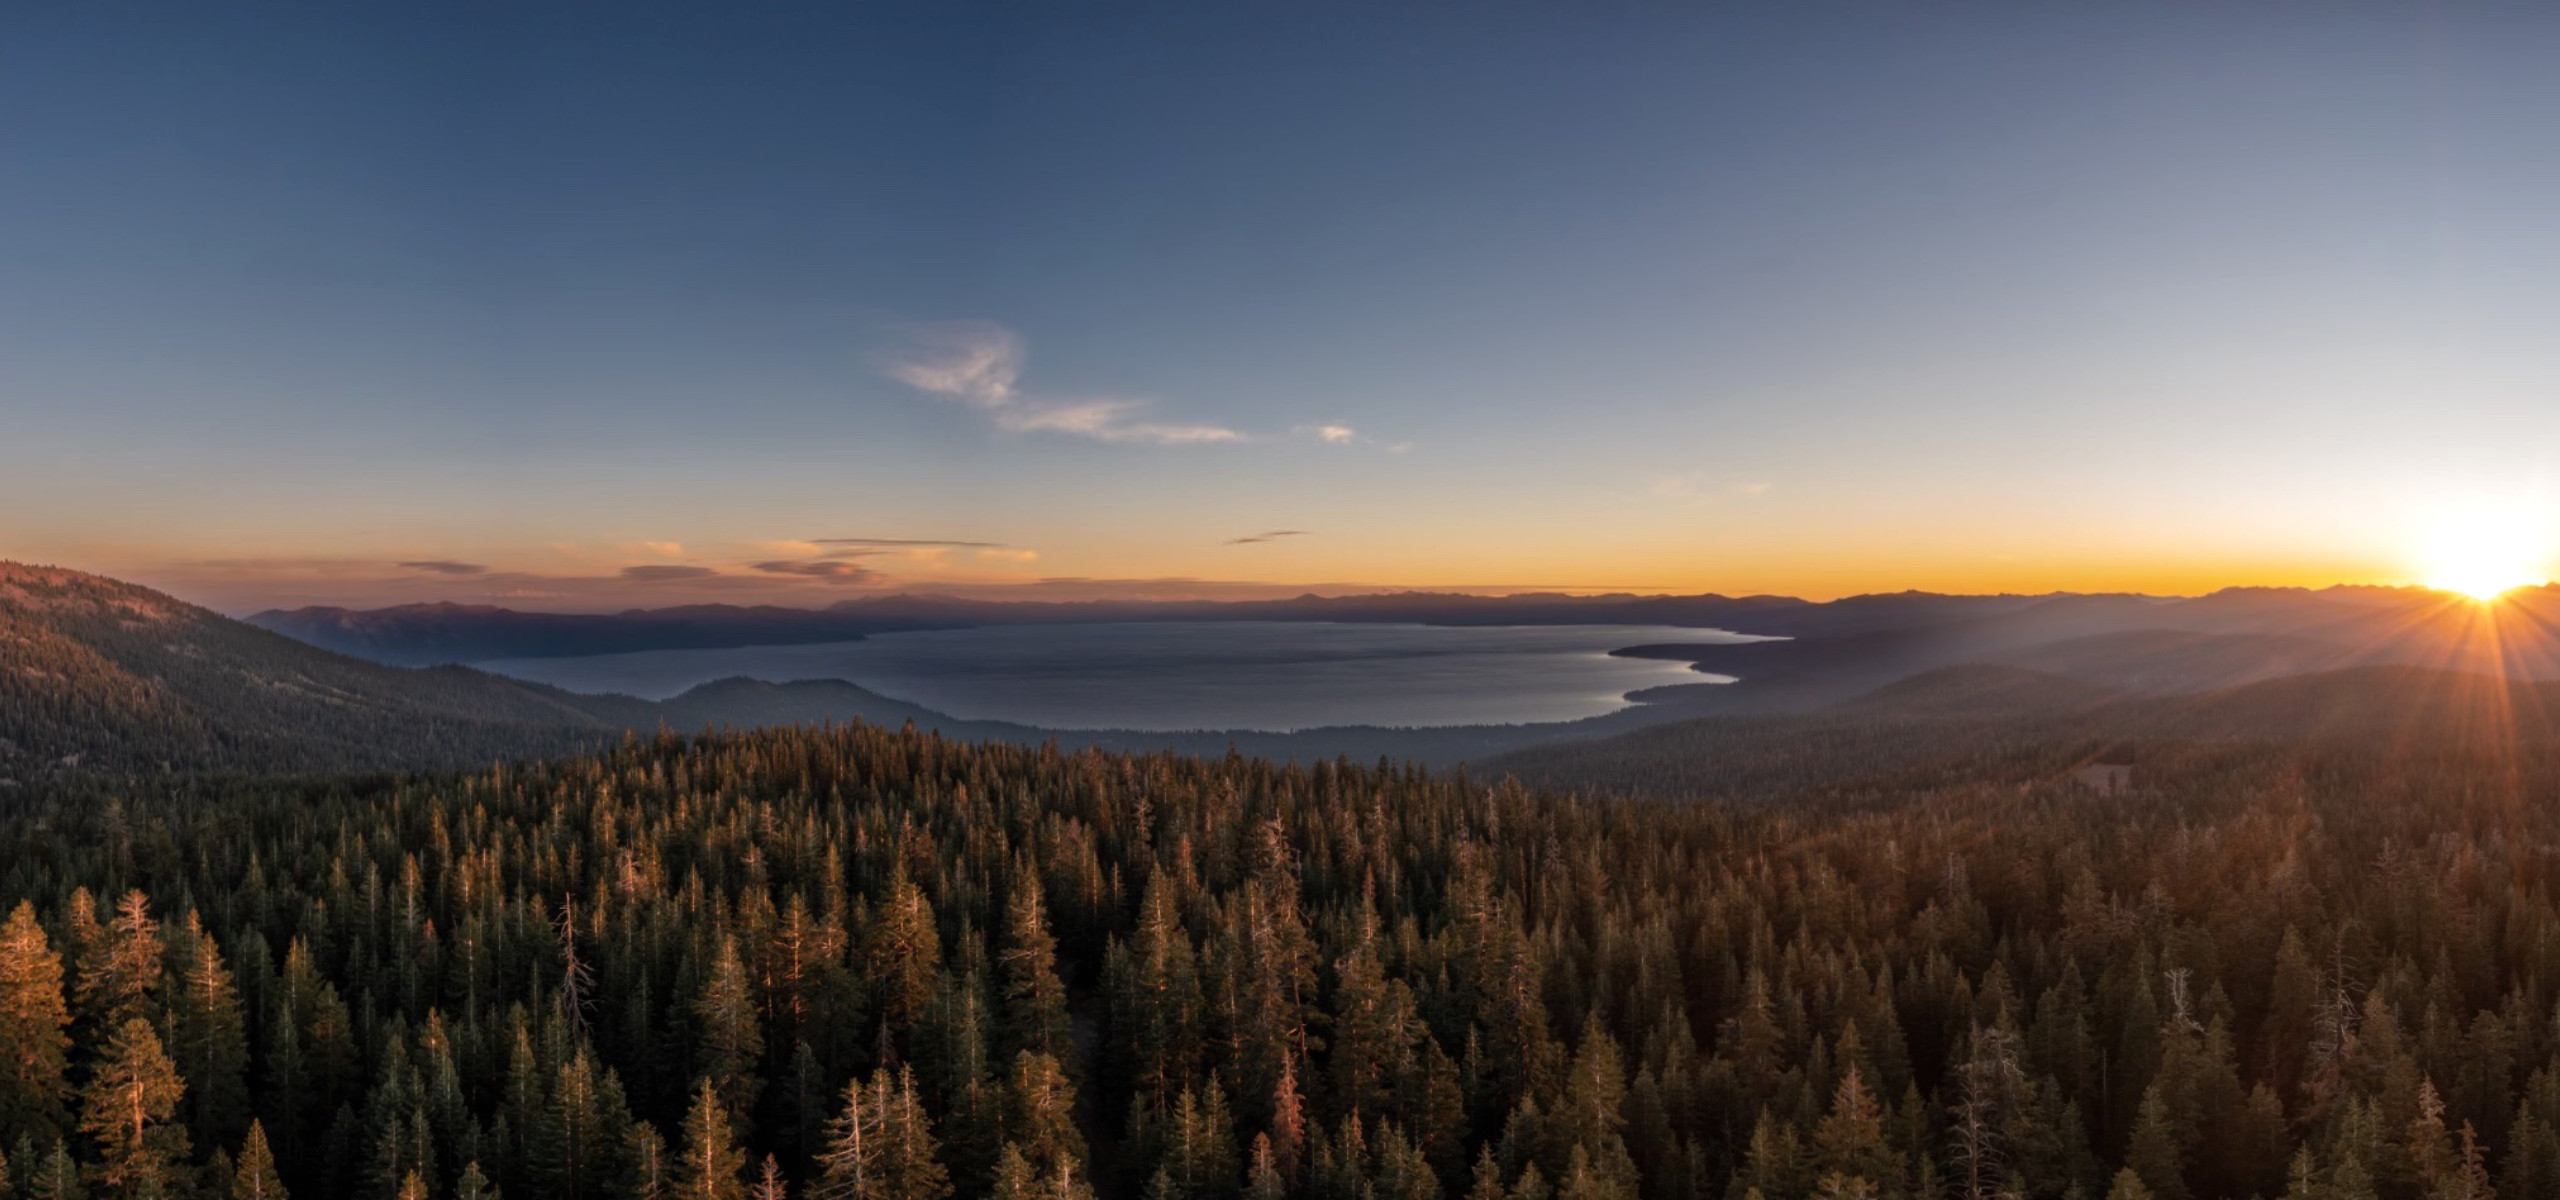 Aerial view of a forest and lake at sunrise